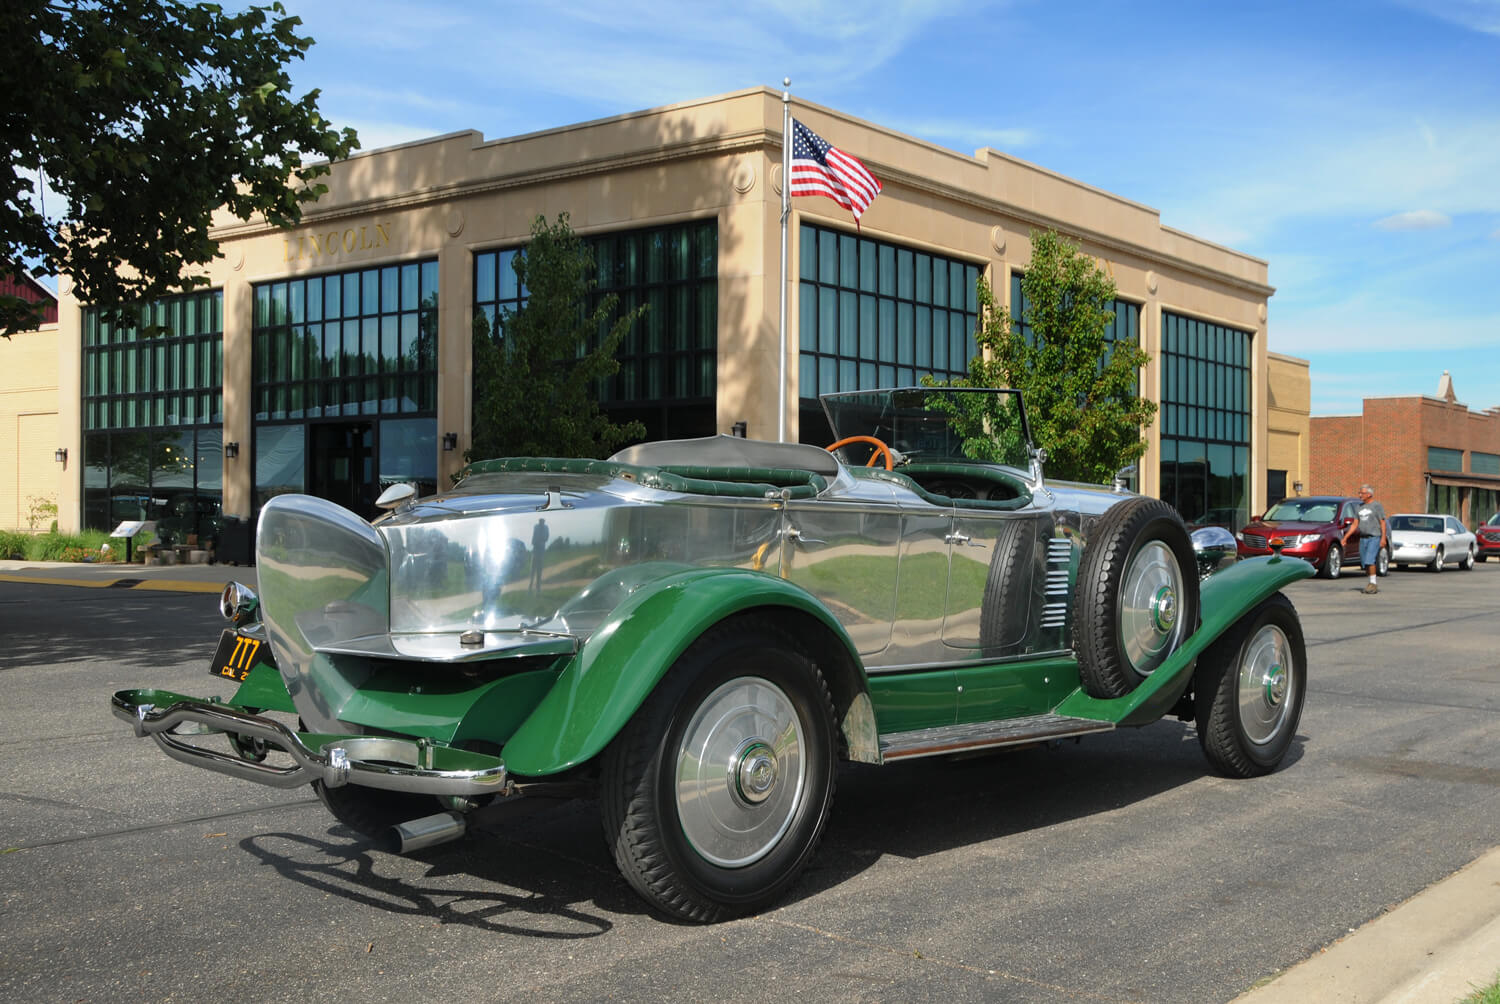 Rare Custom-Built Lincoln Now on Display in Museum